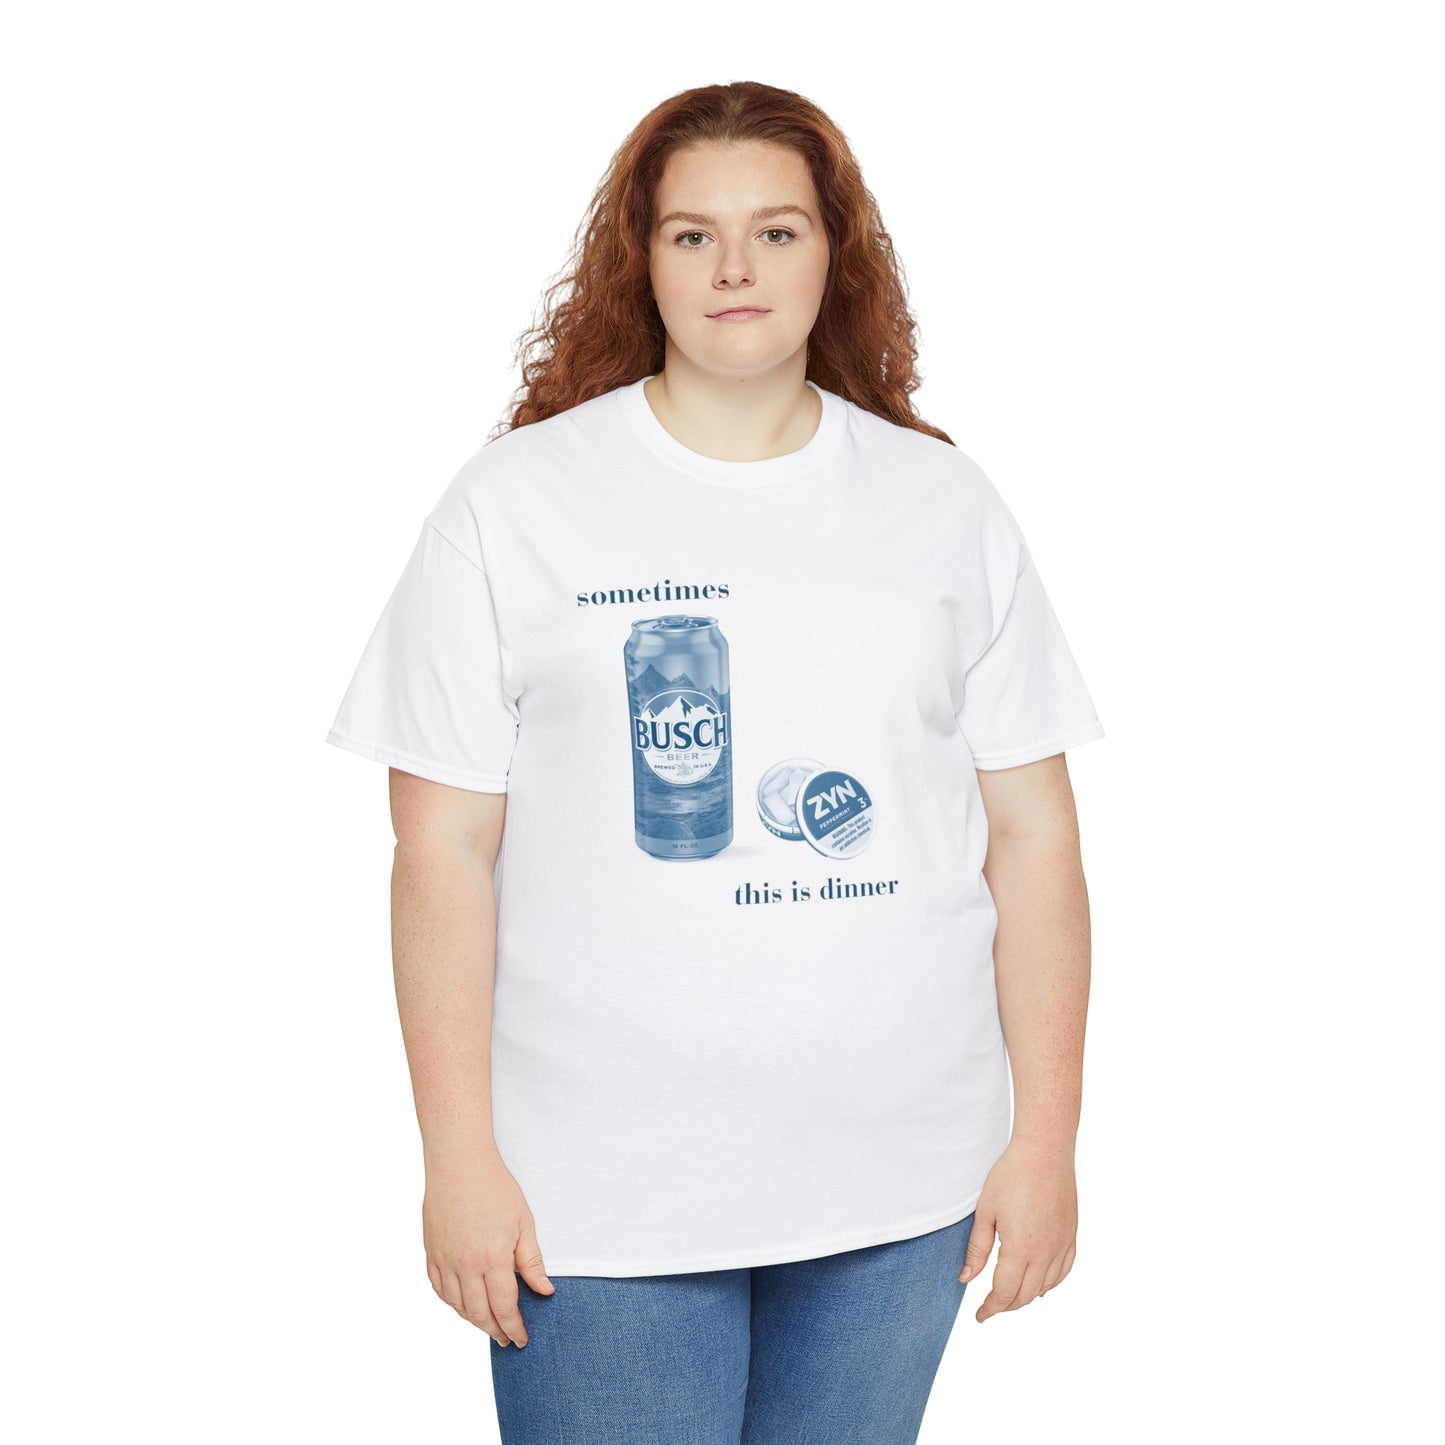 Sometimes this is dinner Busch and Zyns - Unisex Heavy Cotton Tee